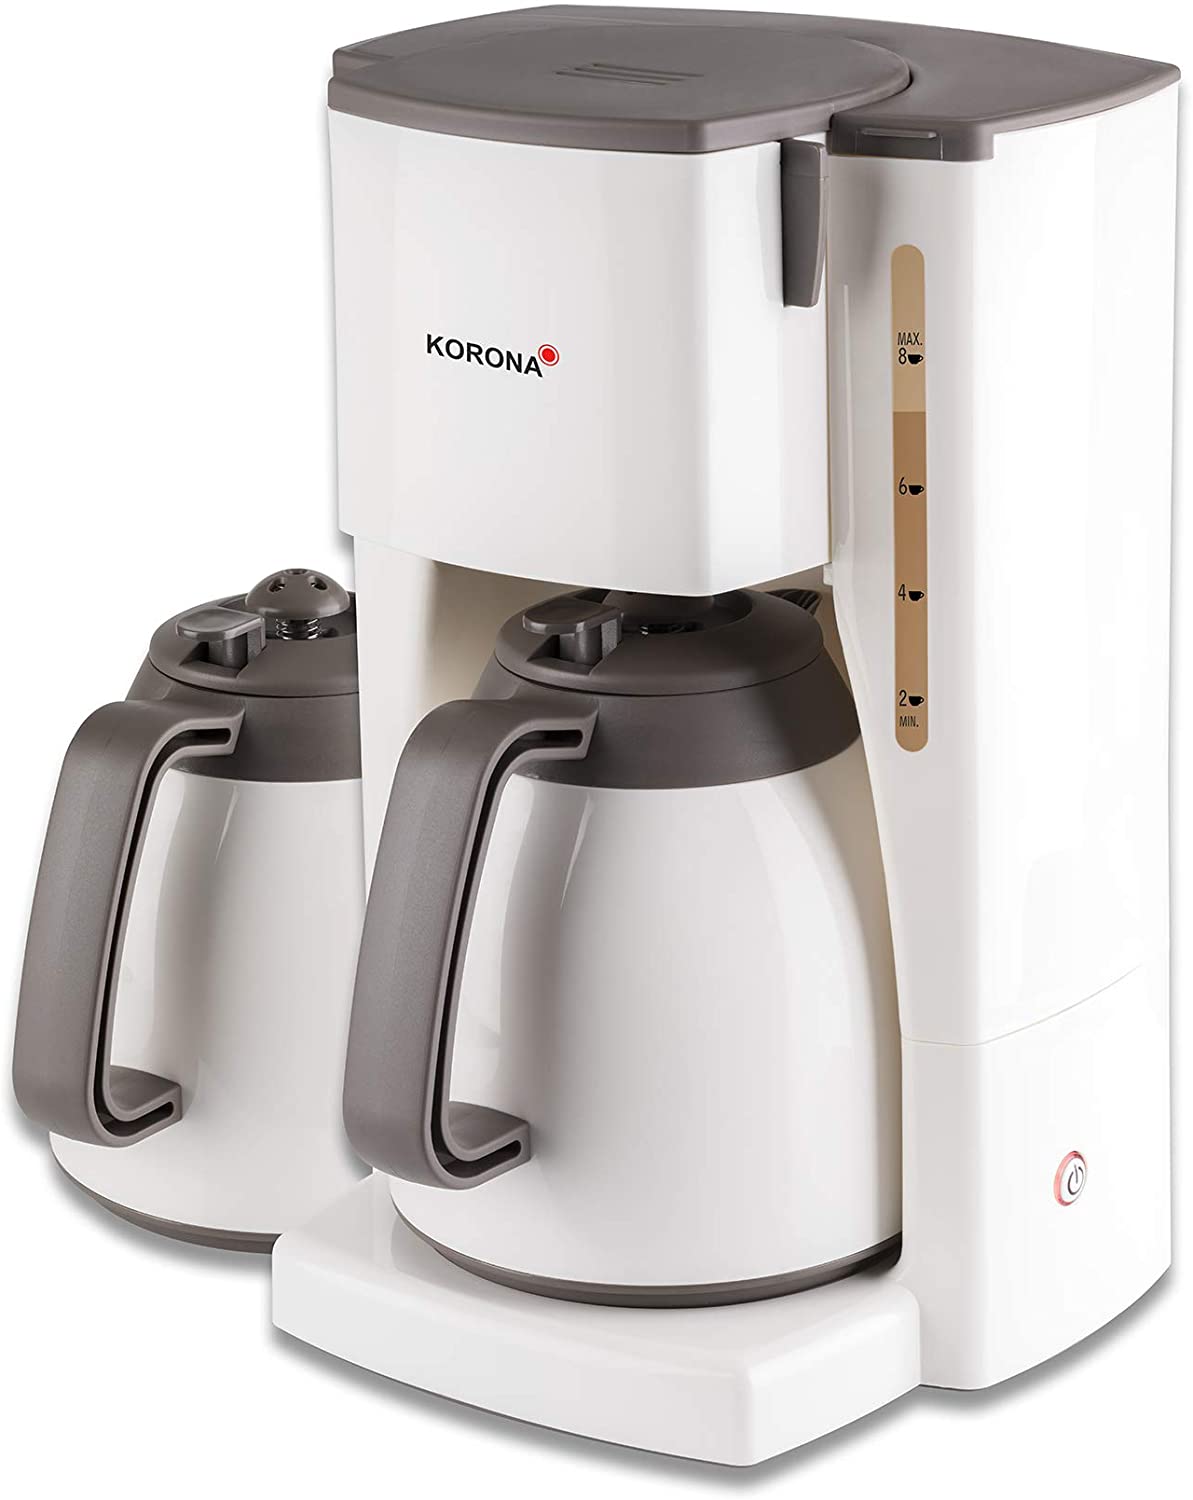 Korona 10310 Coffee Machine with Additional Thermal Jug - Filter Coffee Machine with Capacity for 8 Cups of Coffee